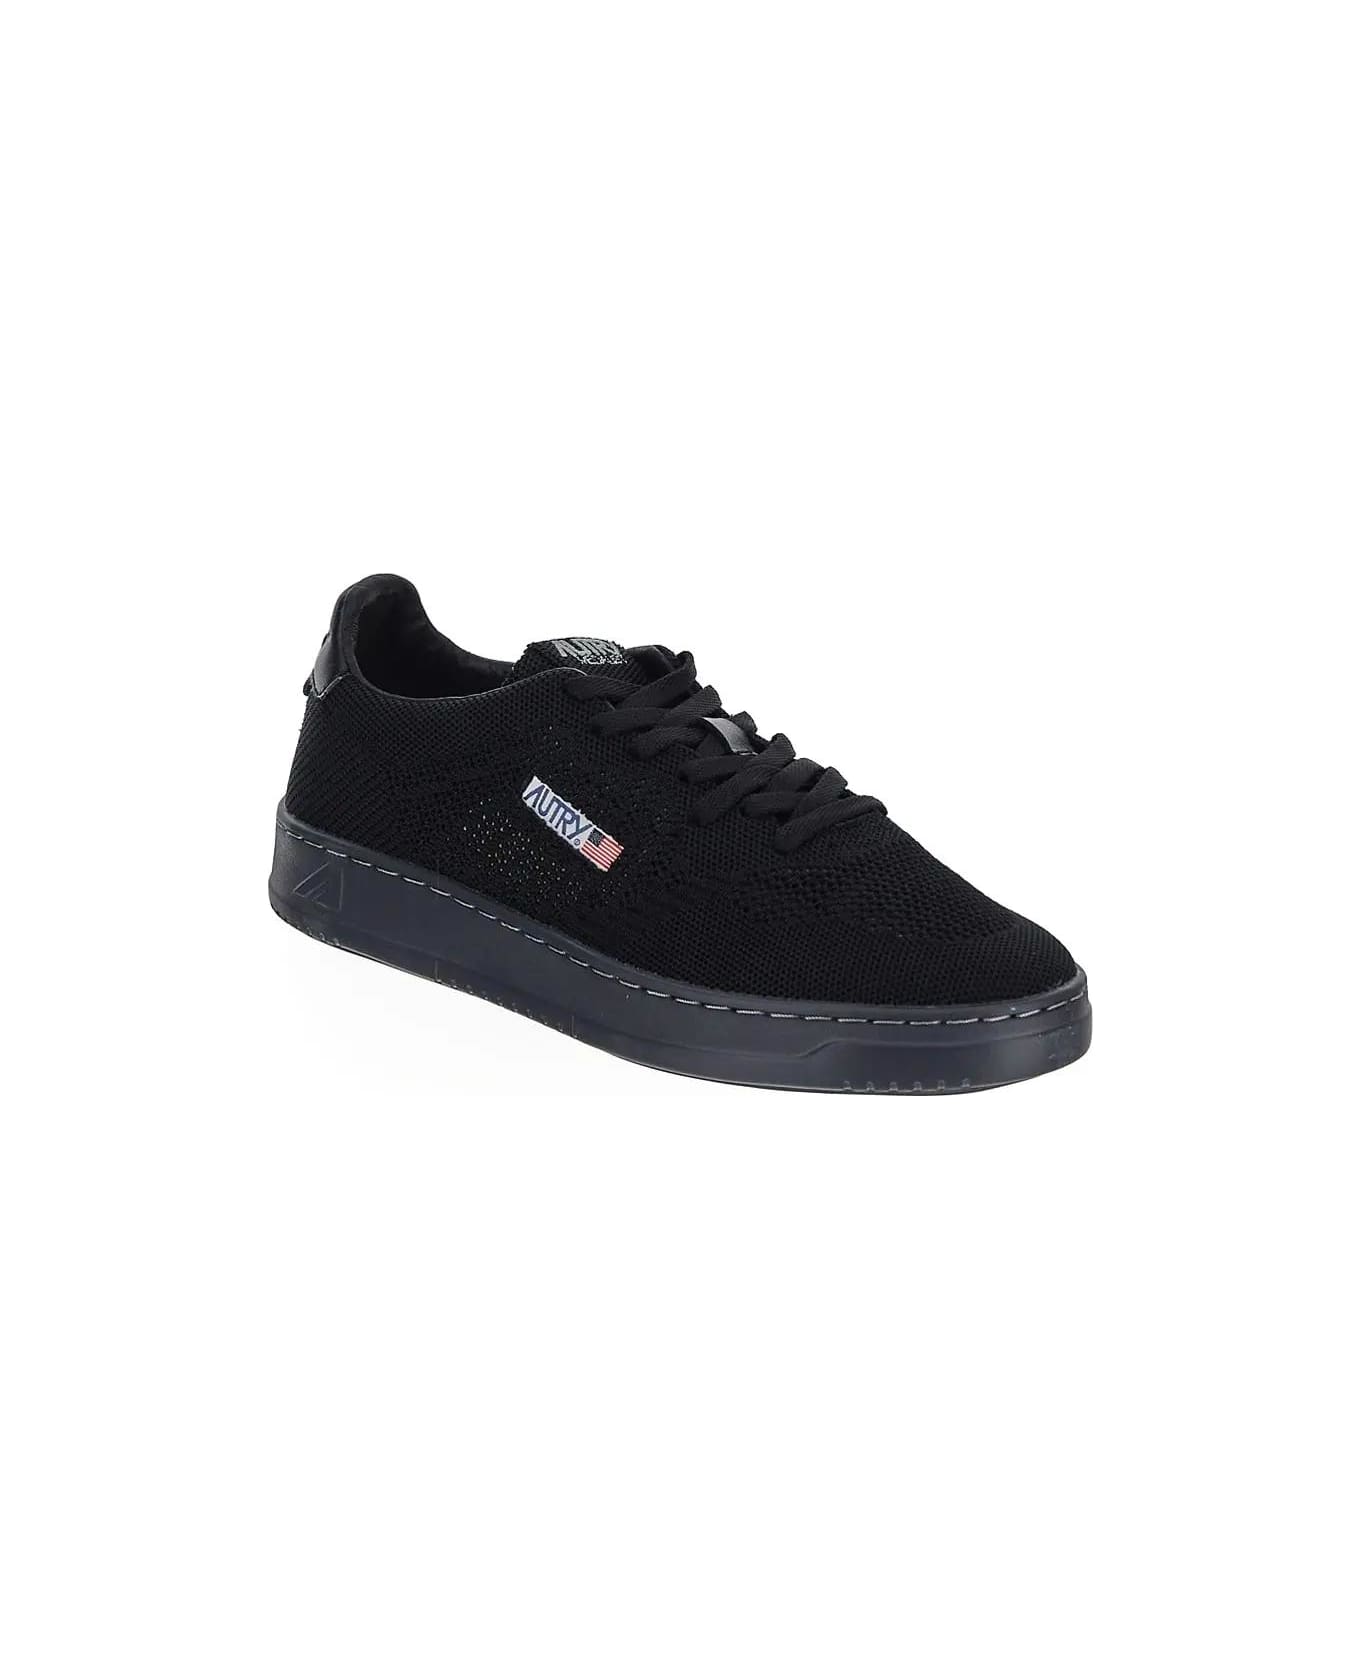 Autry Easeknit Low Sneakers - Nero